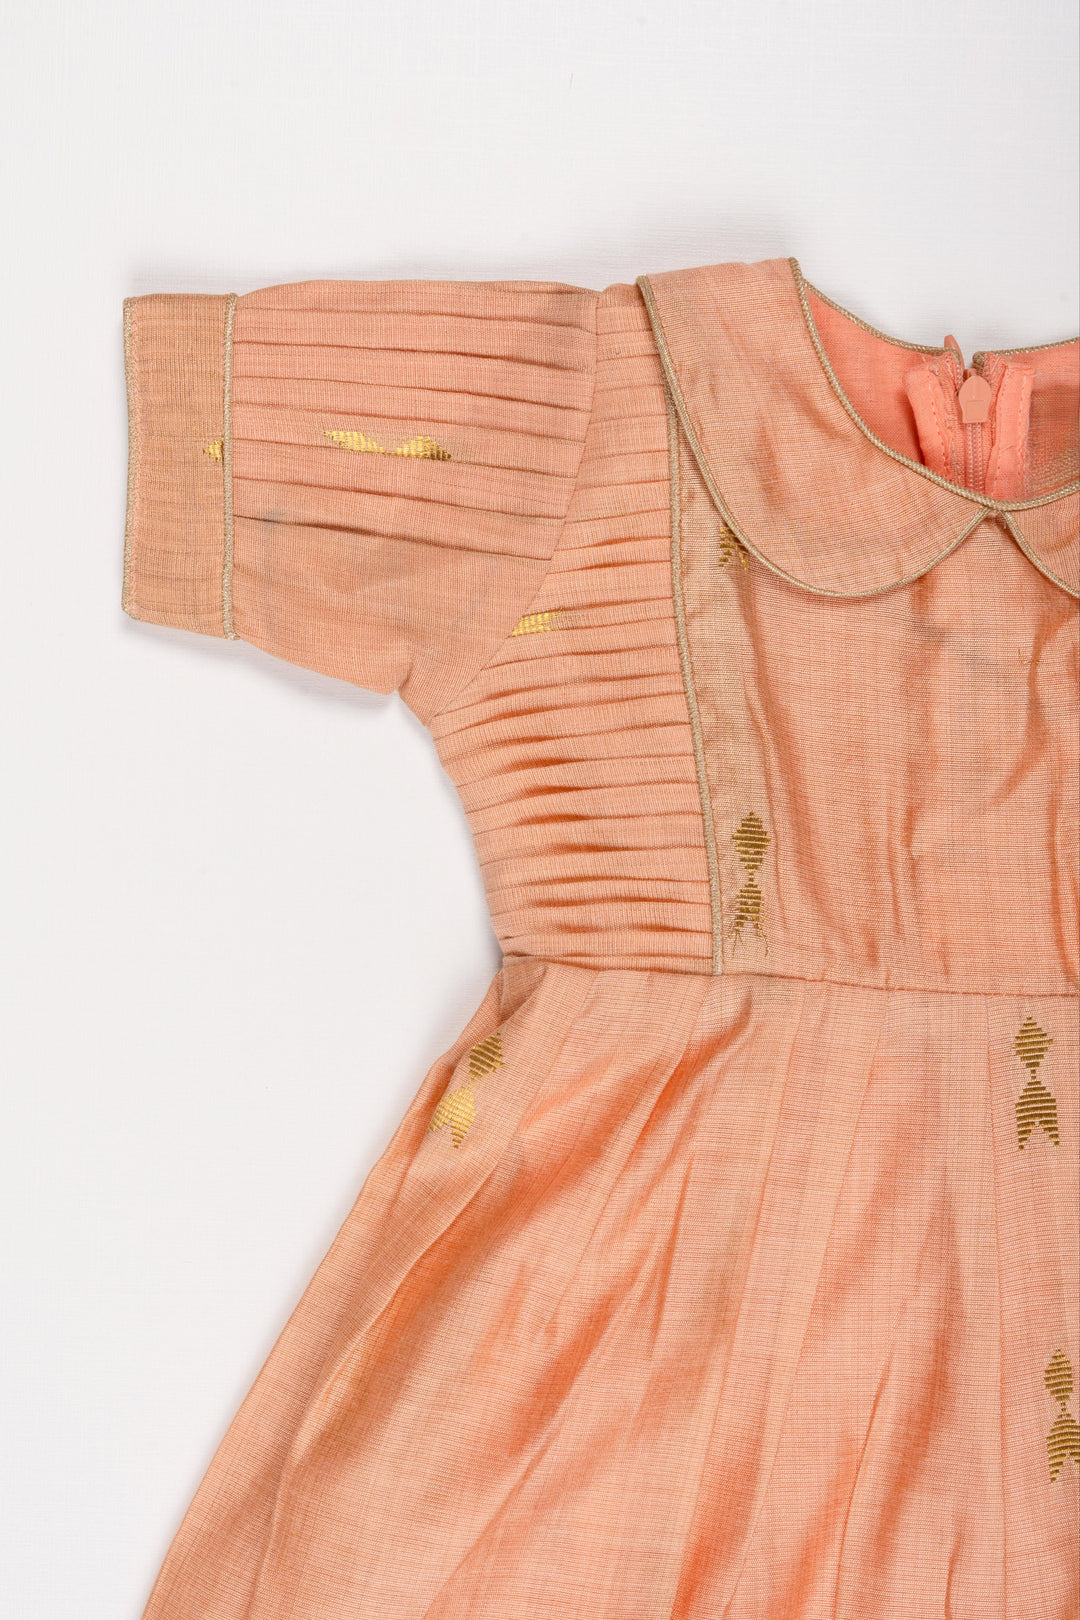 The Nesavu Girls Cotton Frock Autumn Glow Puff Sleeve Dress: Girls' Copper-Toned Frock with Gleaming Accents Nesavu Girls Copper-Toned Harvest Dress with Puff Sleeves | Golden Motif Party Wear | The Nesavu